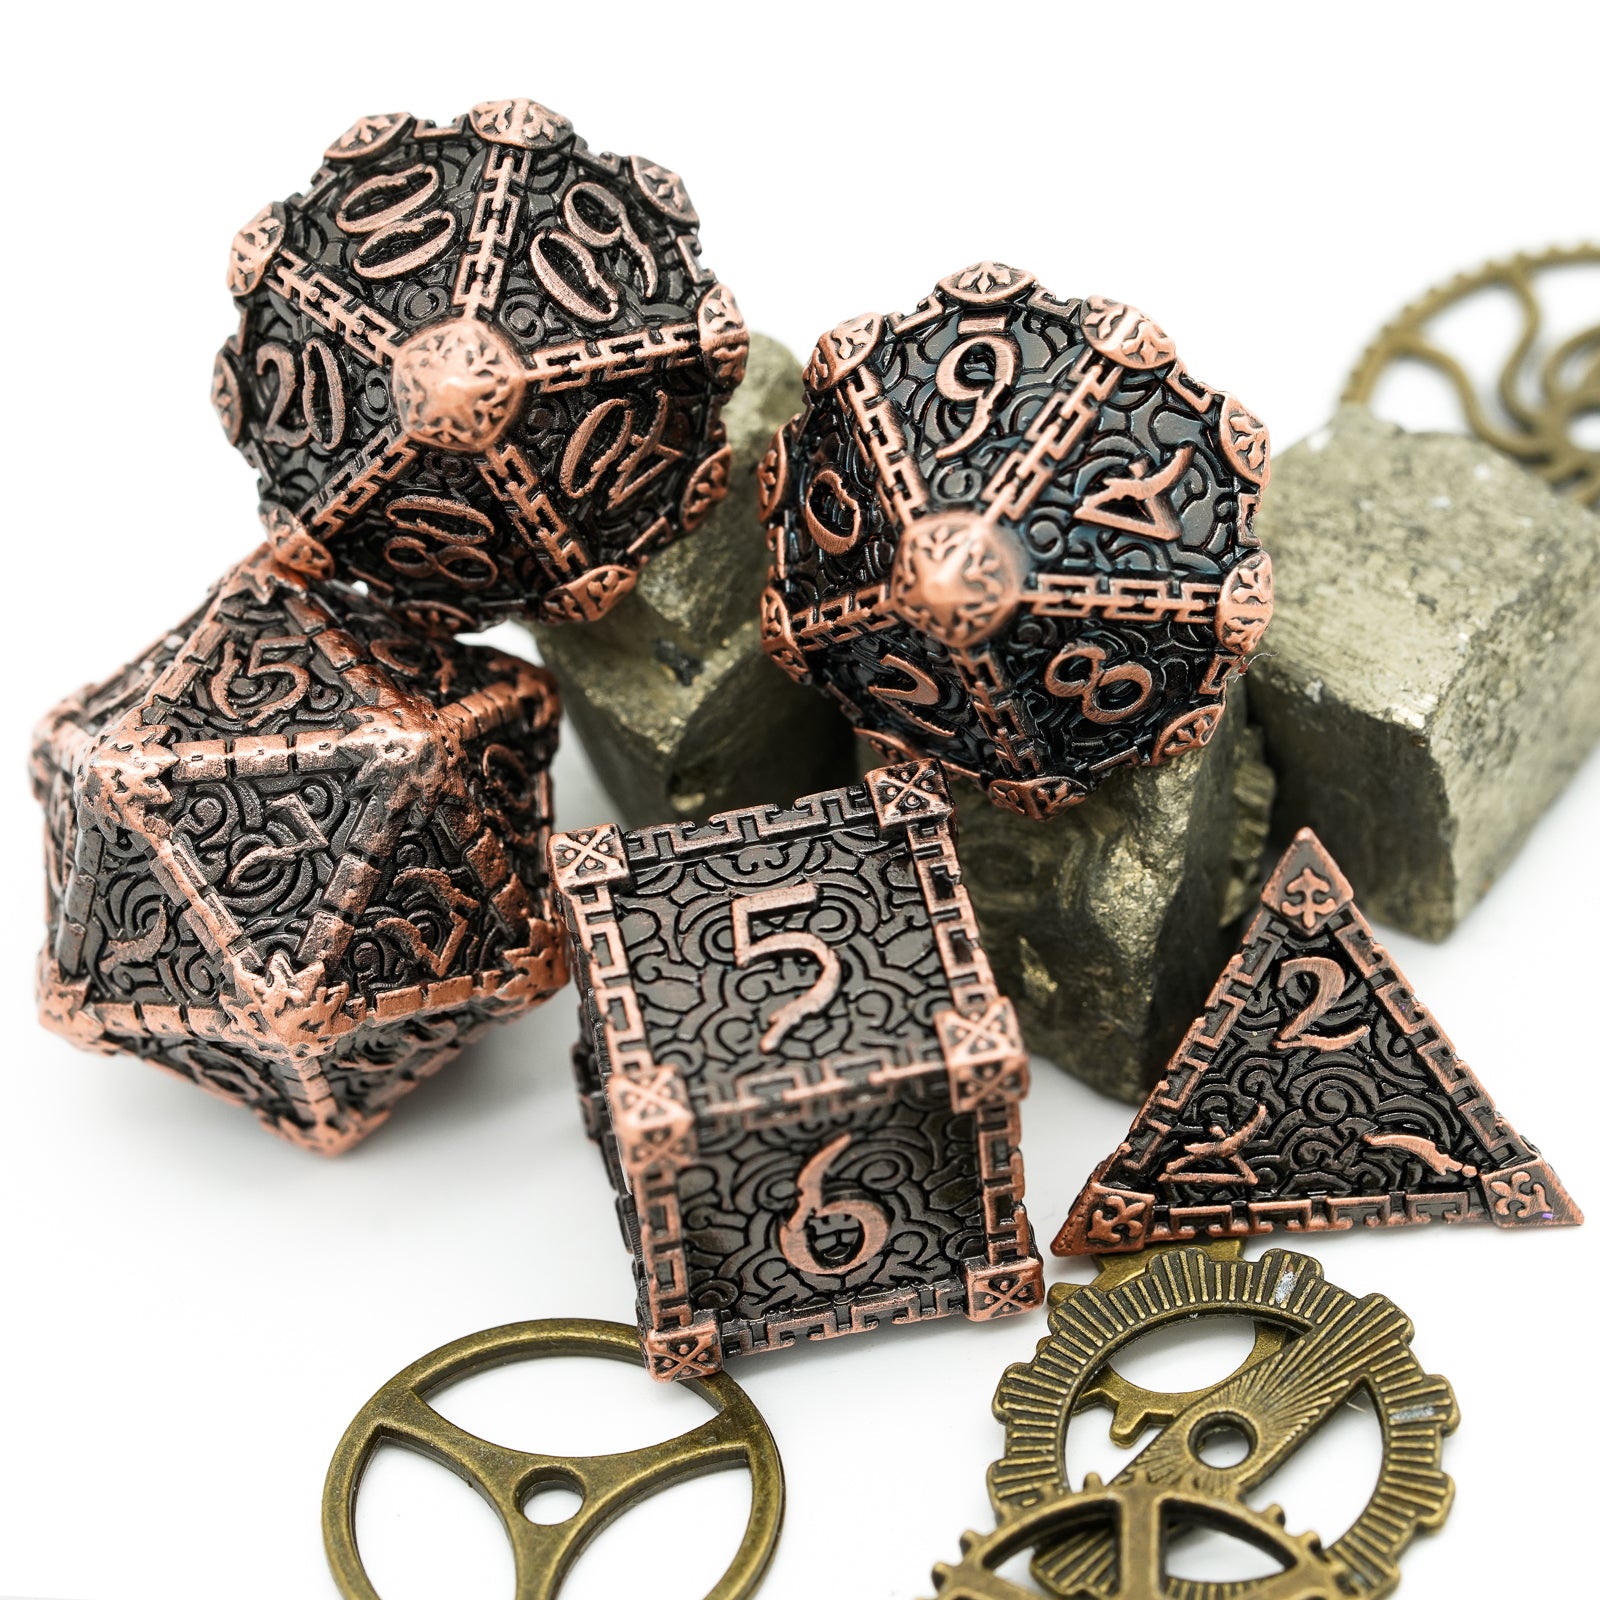 5 bronze metal dice with gears and rocks as background